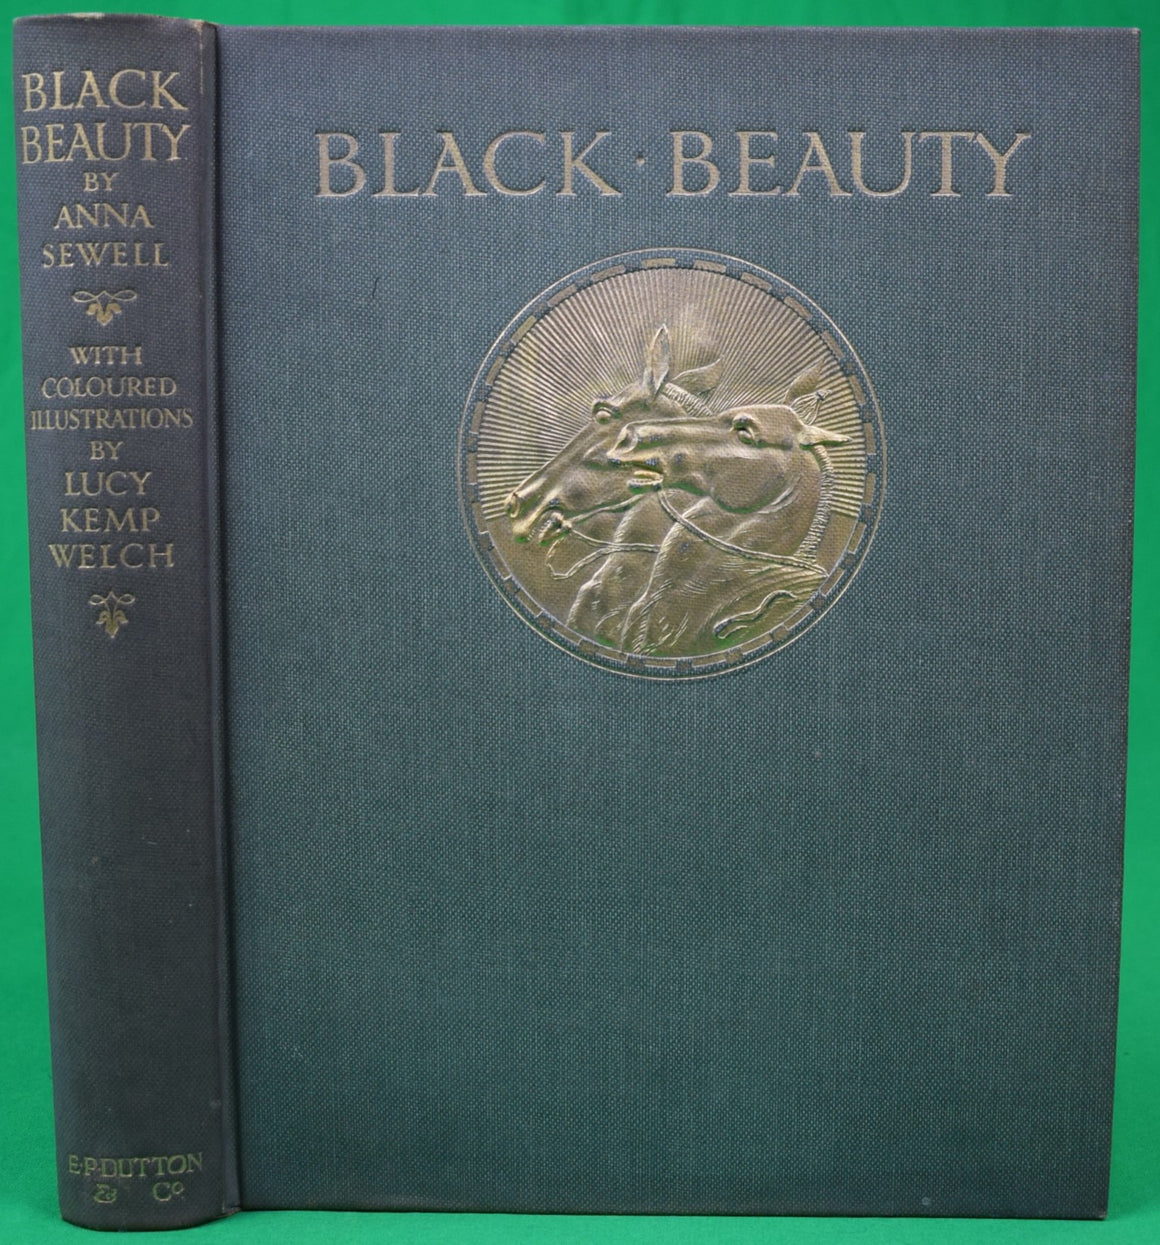 "Black Beauty" 1915 SEWELL, Anna (SOLD)